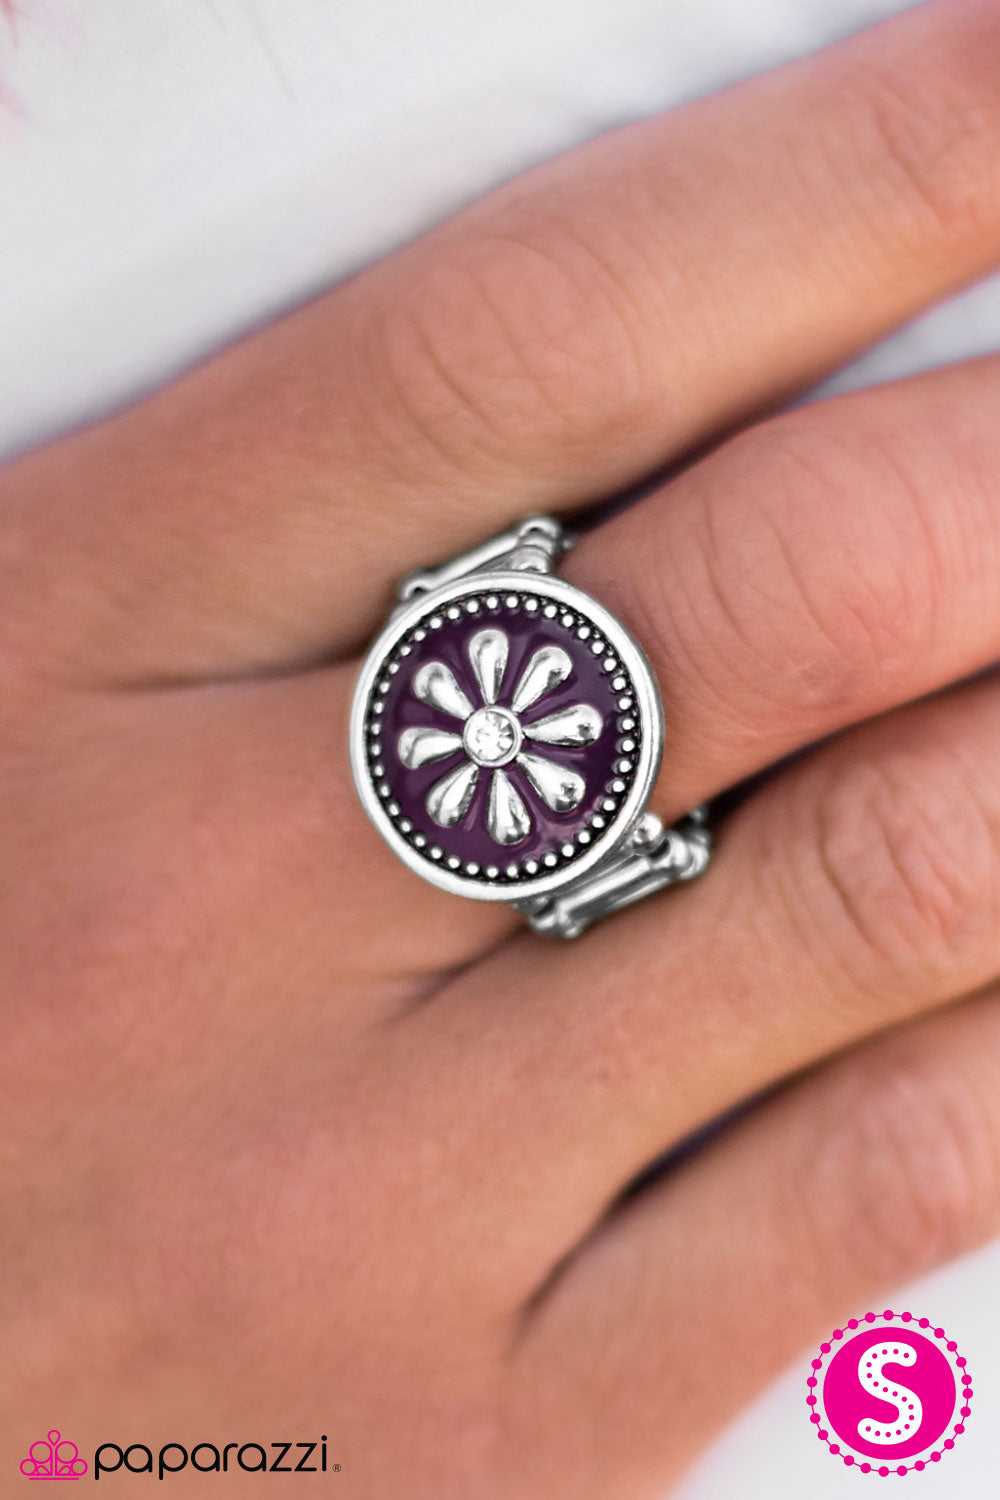 If Today Was A Fairytale - Paparazzi ring